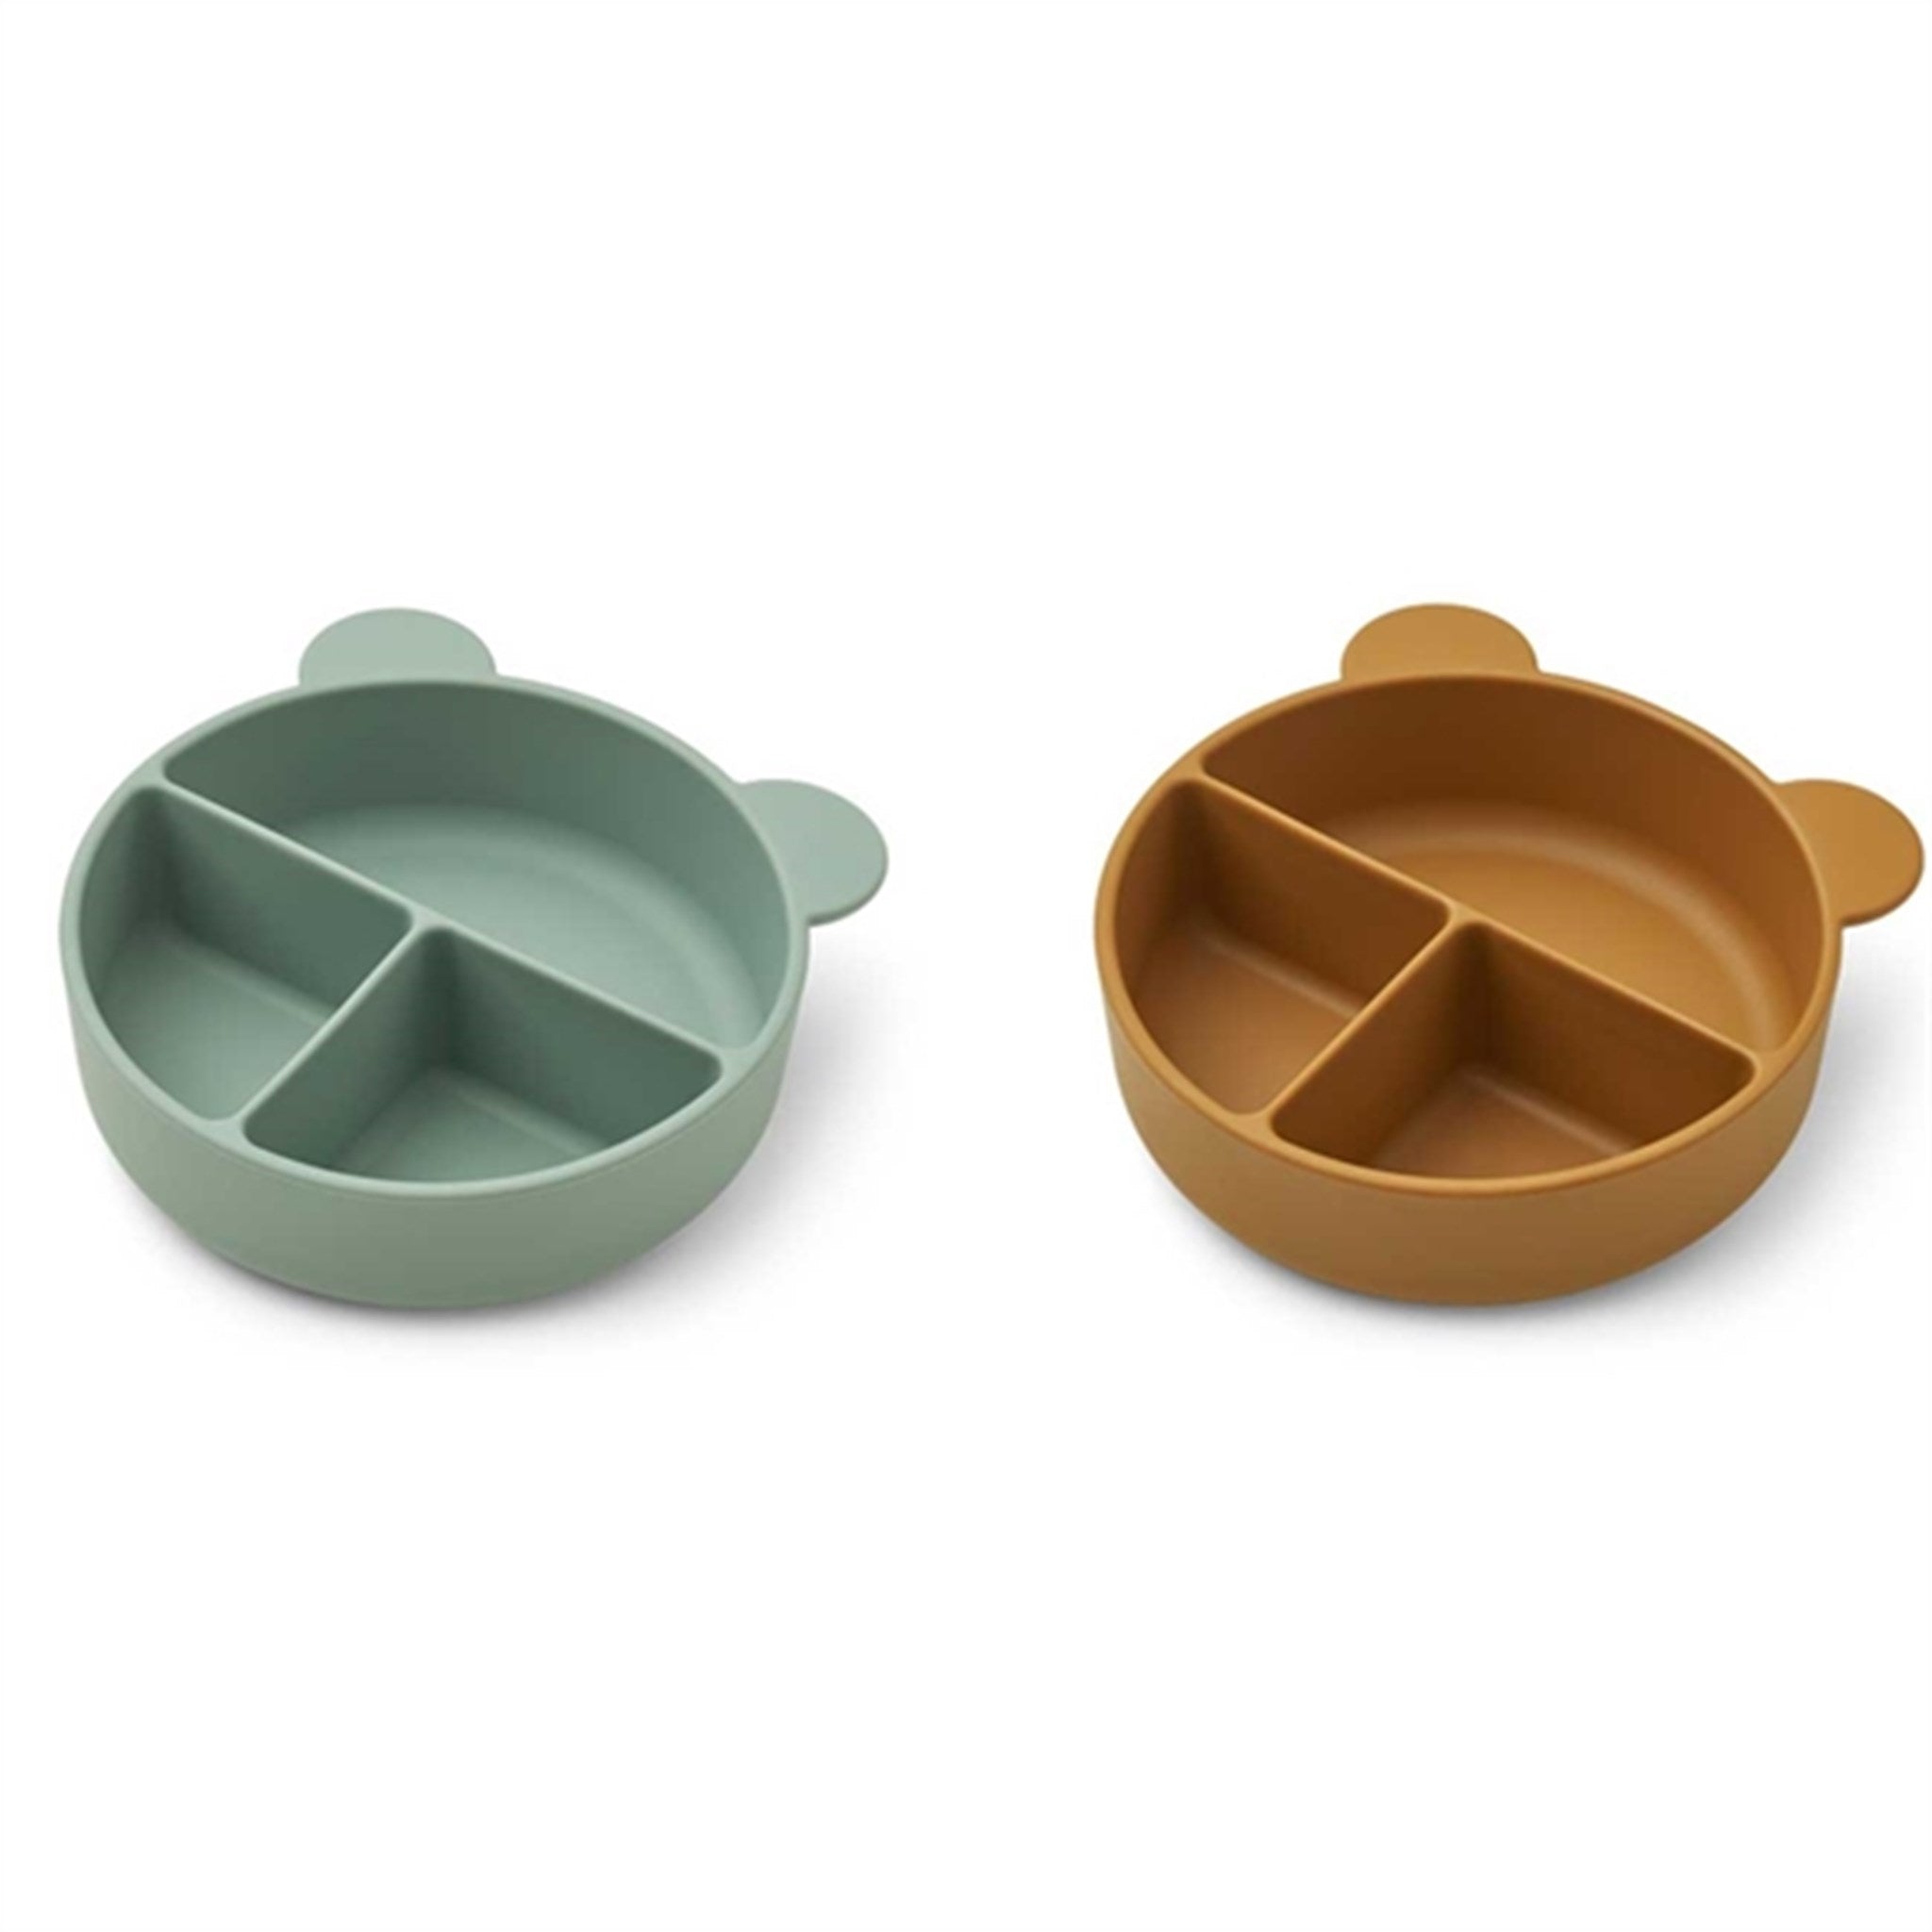 Liewood Conny Silicone Divider Bowls 2-pack Peppermint Golden Caramel Mix